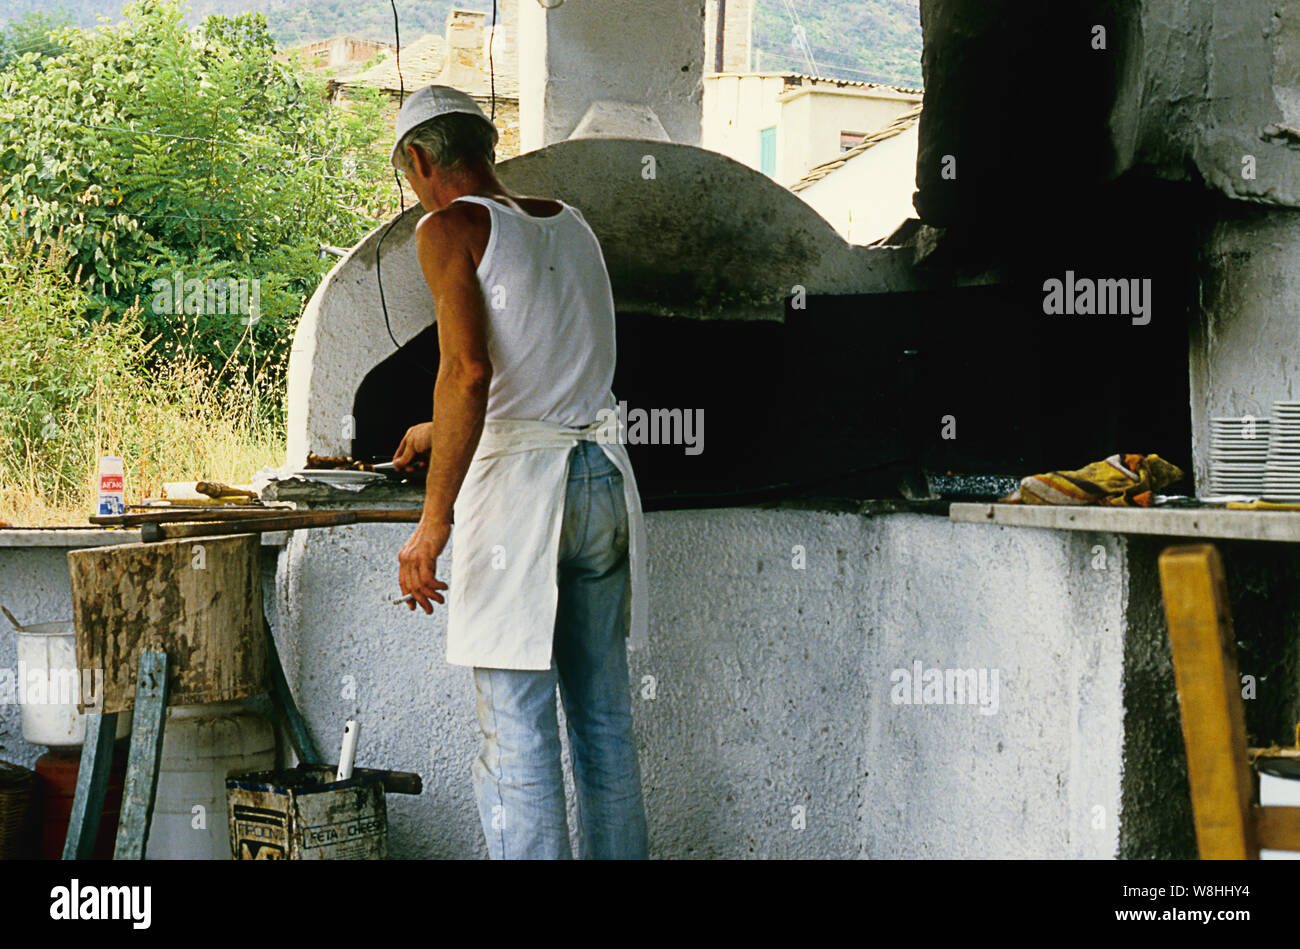 Taverna chef ignores basic health and safety procedures by smoking whilst preparing food in an outdoor kitchen in Skala Potamias, Thassos, Greece. Stock Photo